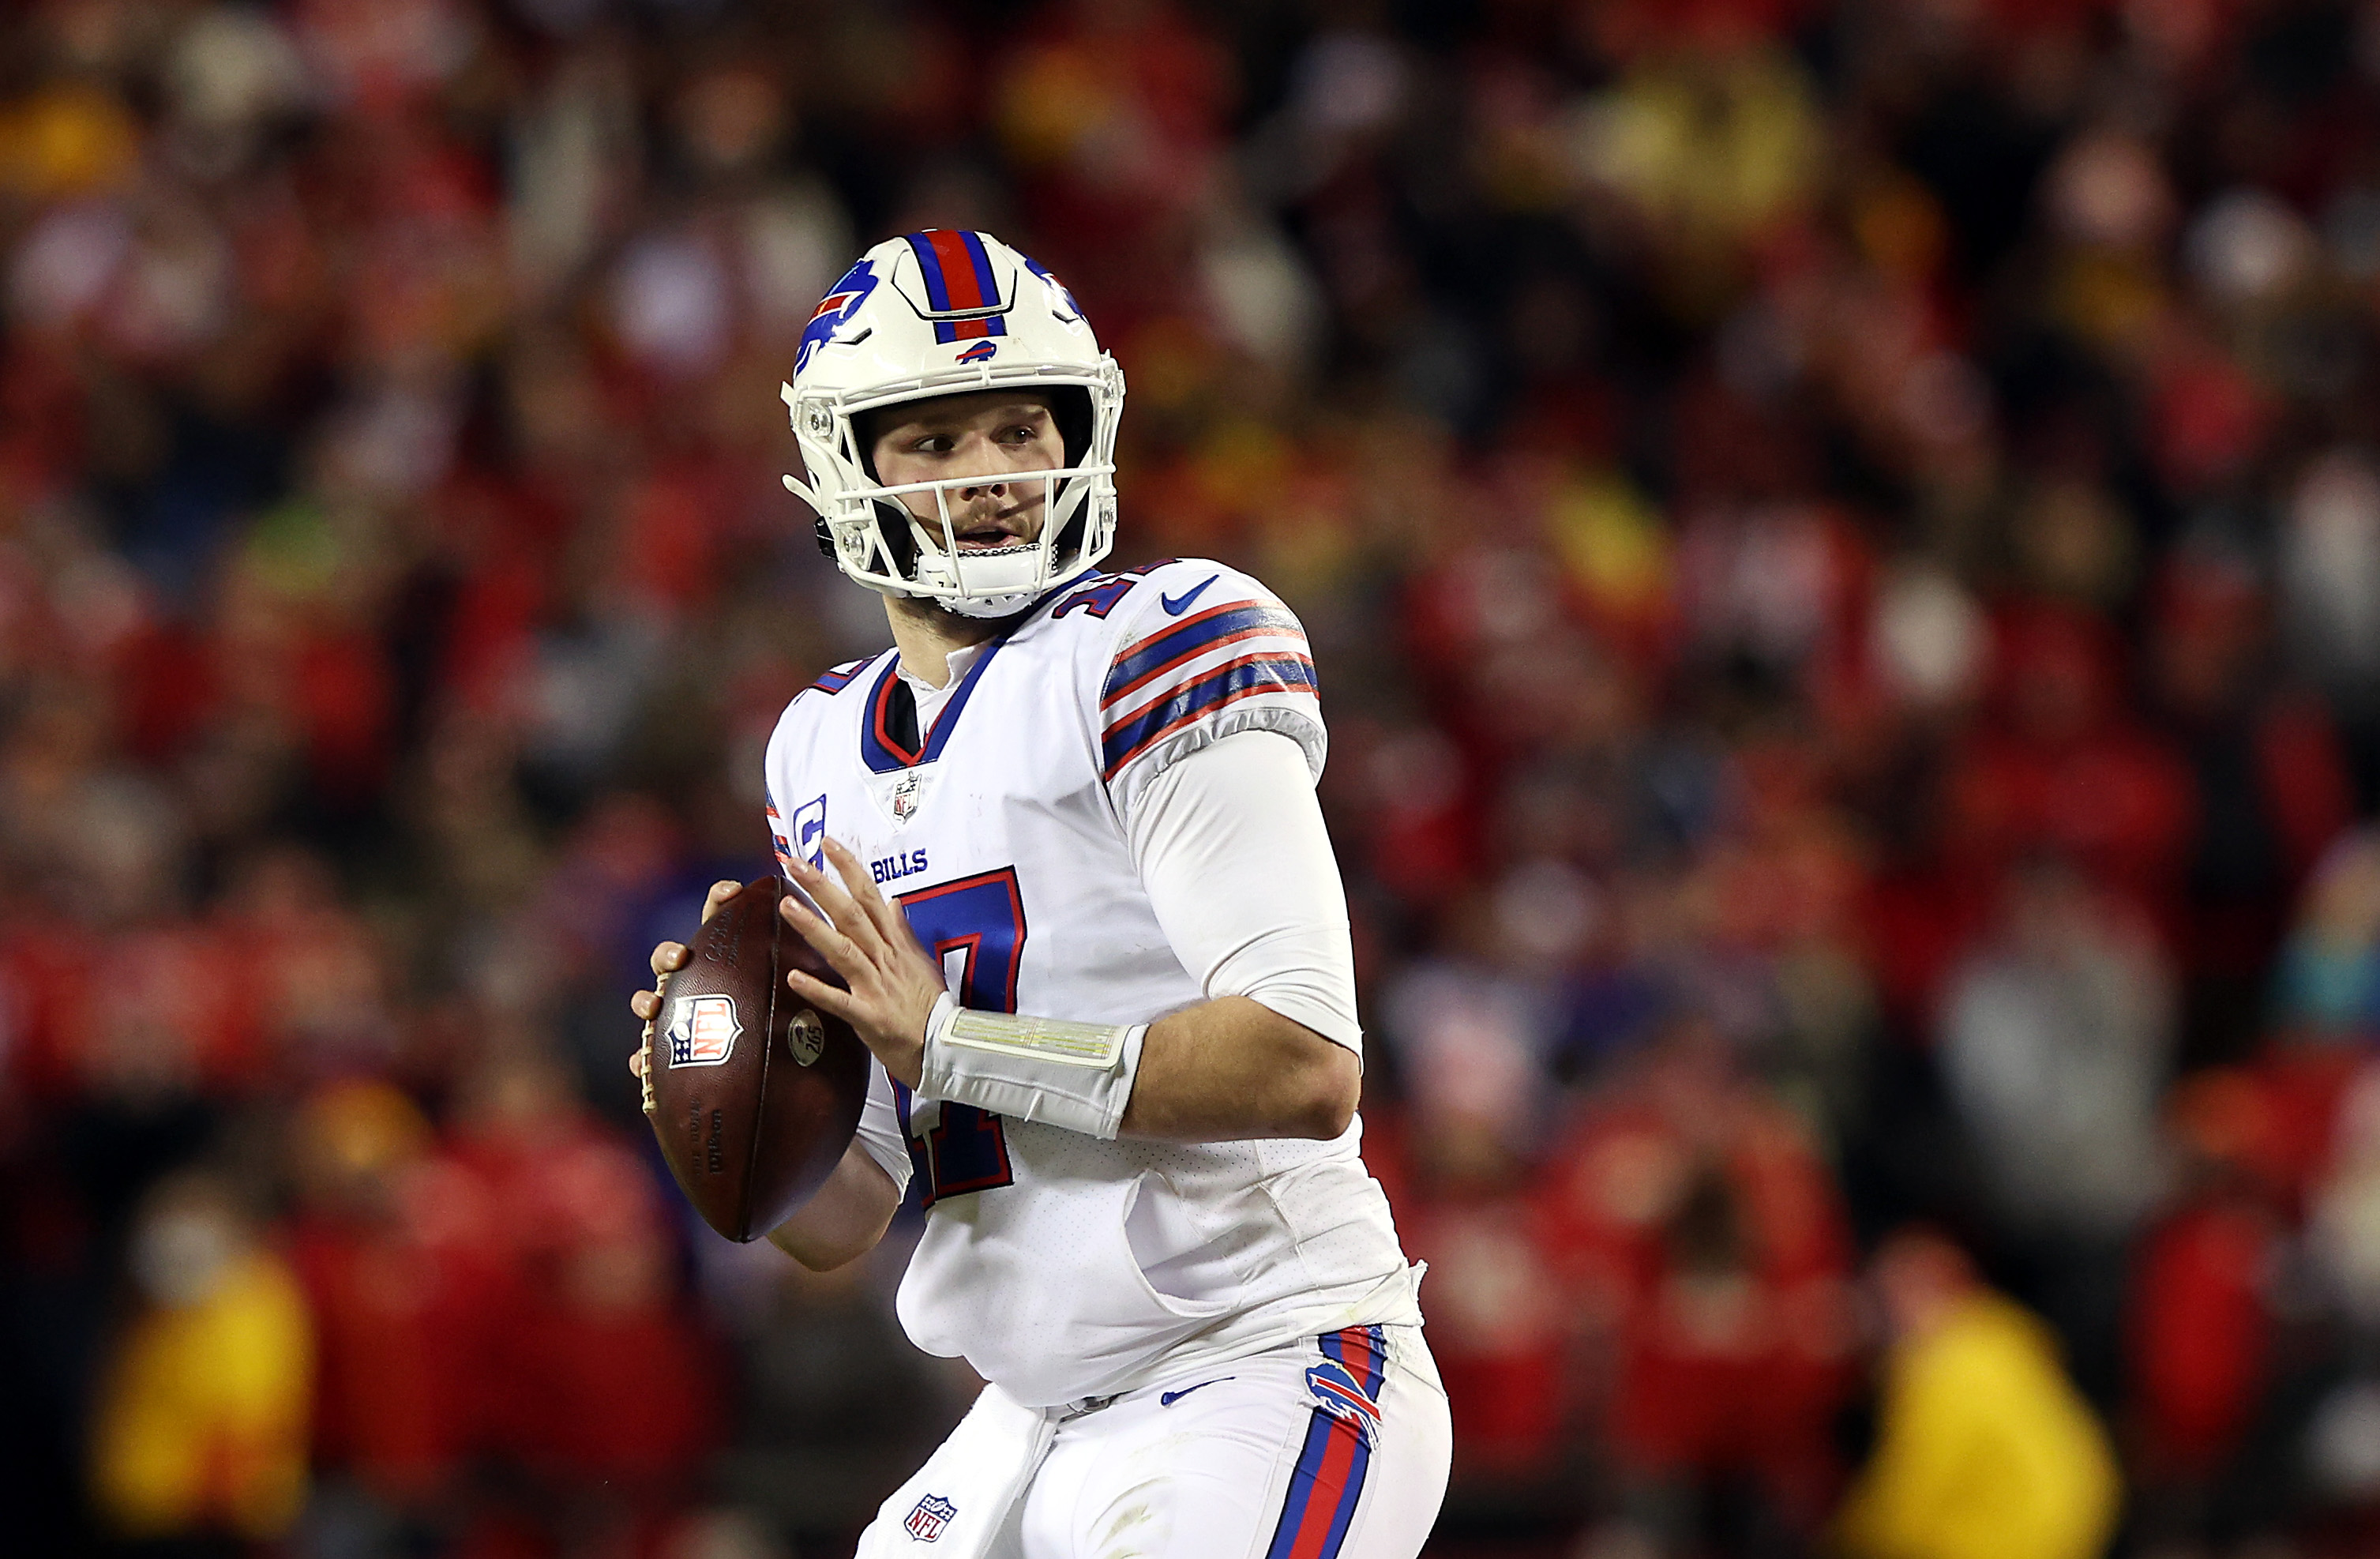 Quarterback Josh Allen #17 of the Buffalo Bills looks to pass during the 4th quarter of the AFC Divisional Playoff game against the Kansas City Chiefs at Arrowhead Stadium on January 23, 2022 in Kansas City, Missouri.